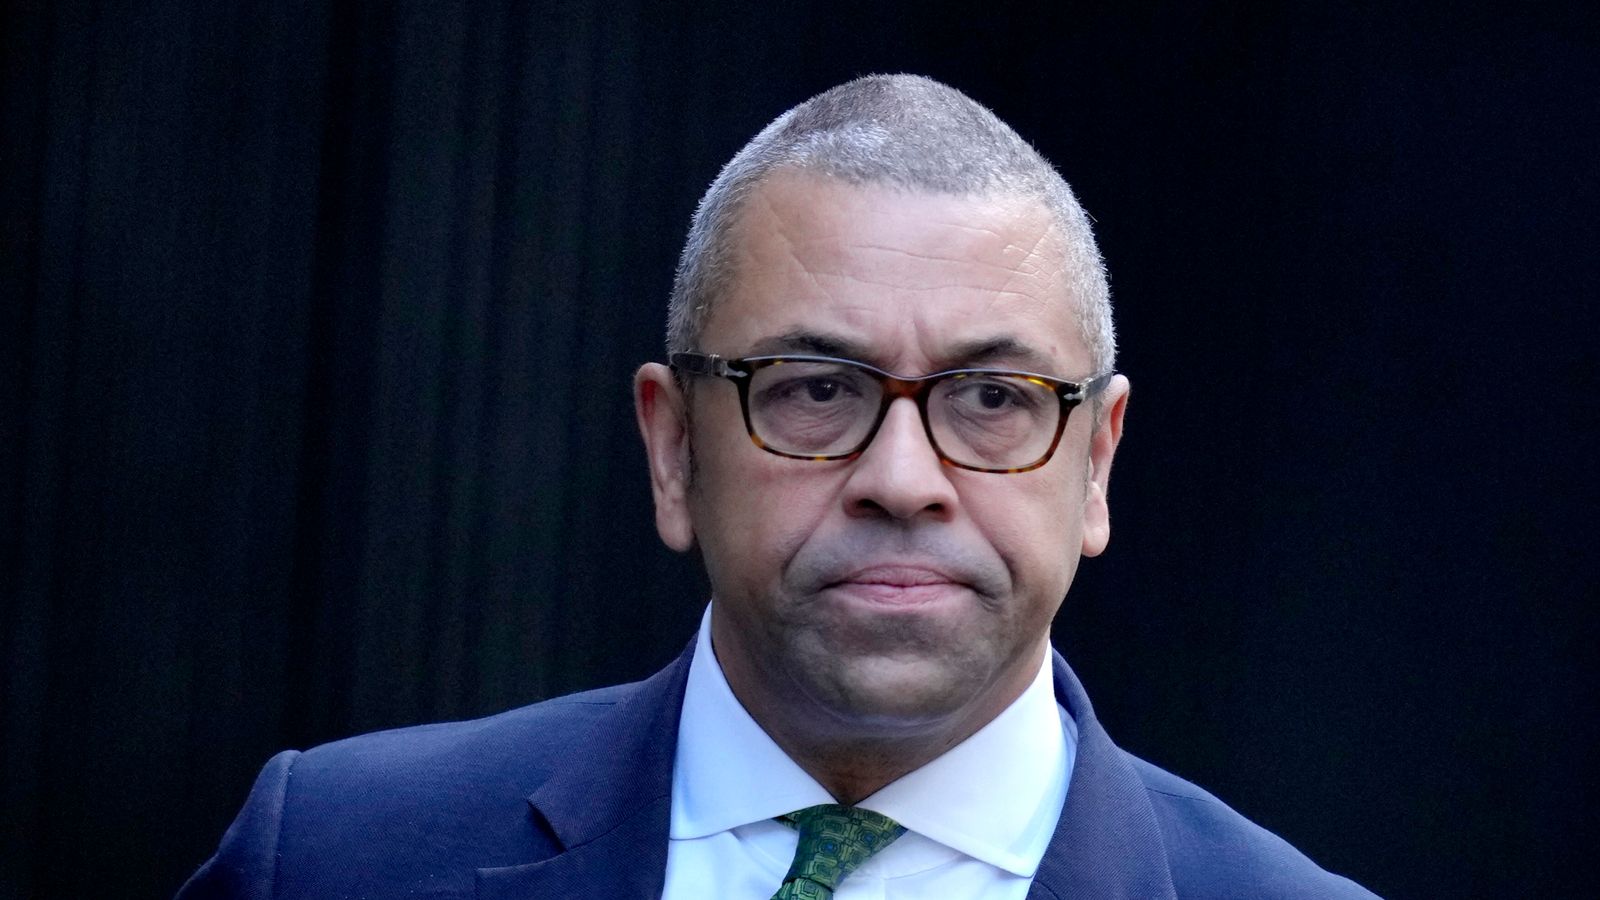 Foreign secretary James Cleverly criticised for 'tone-deaf' LGBT comments about ..